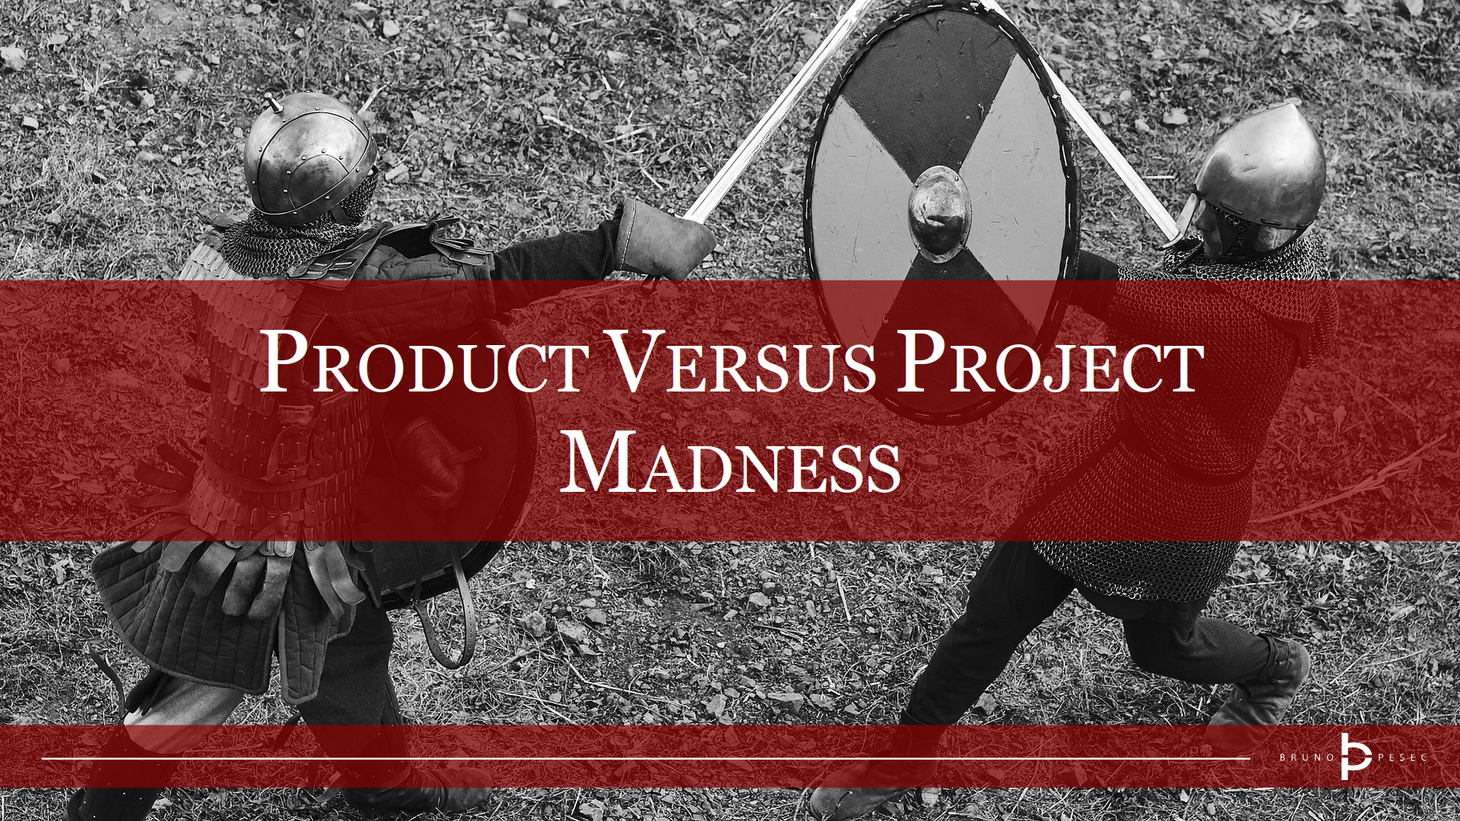 Product versus project madness